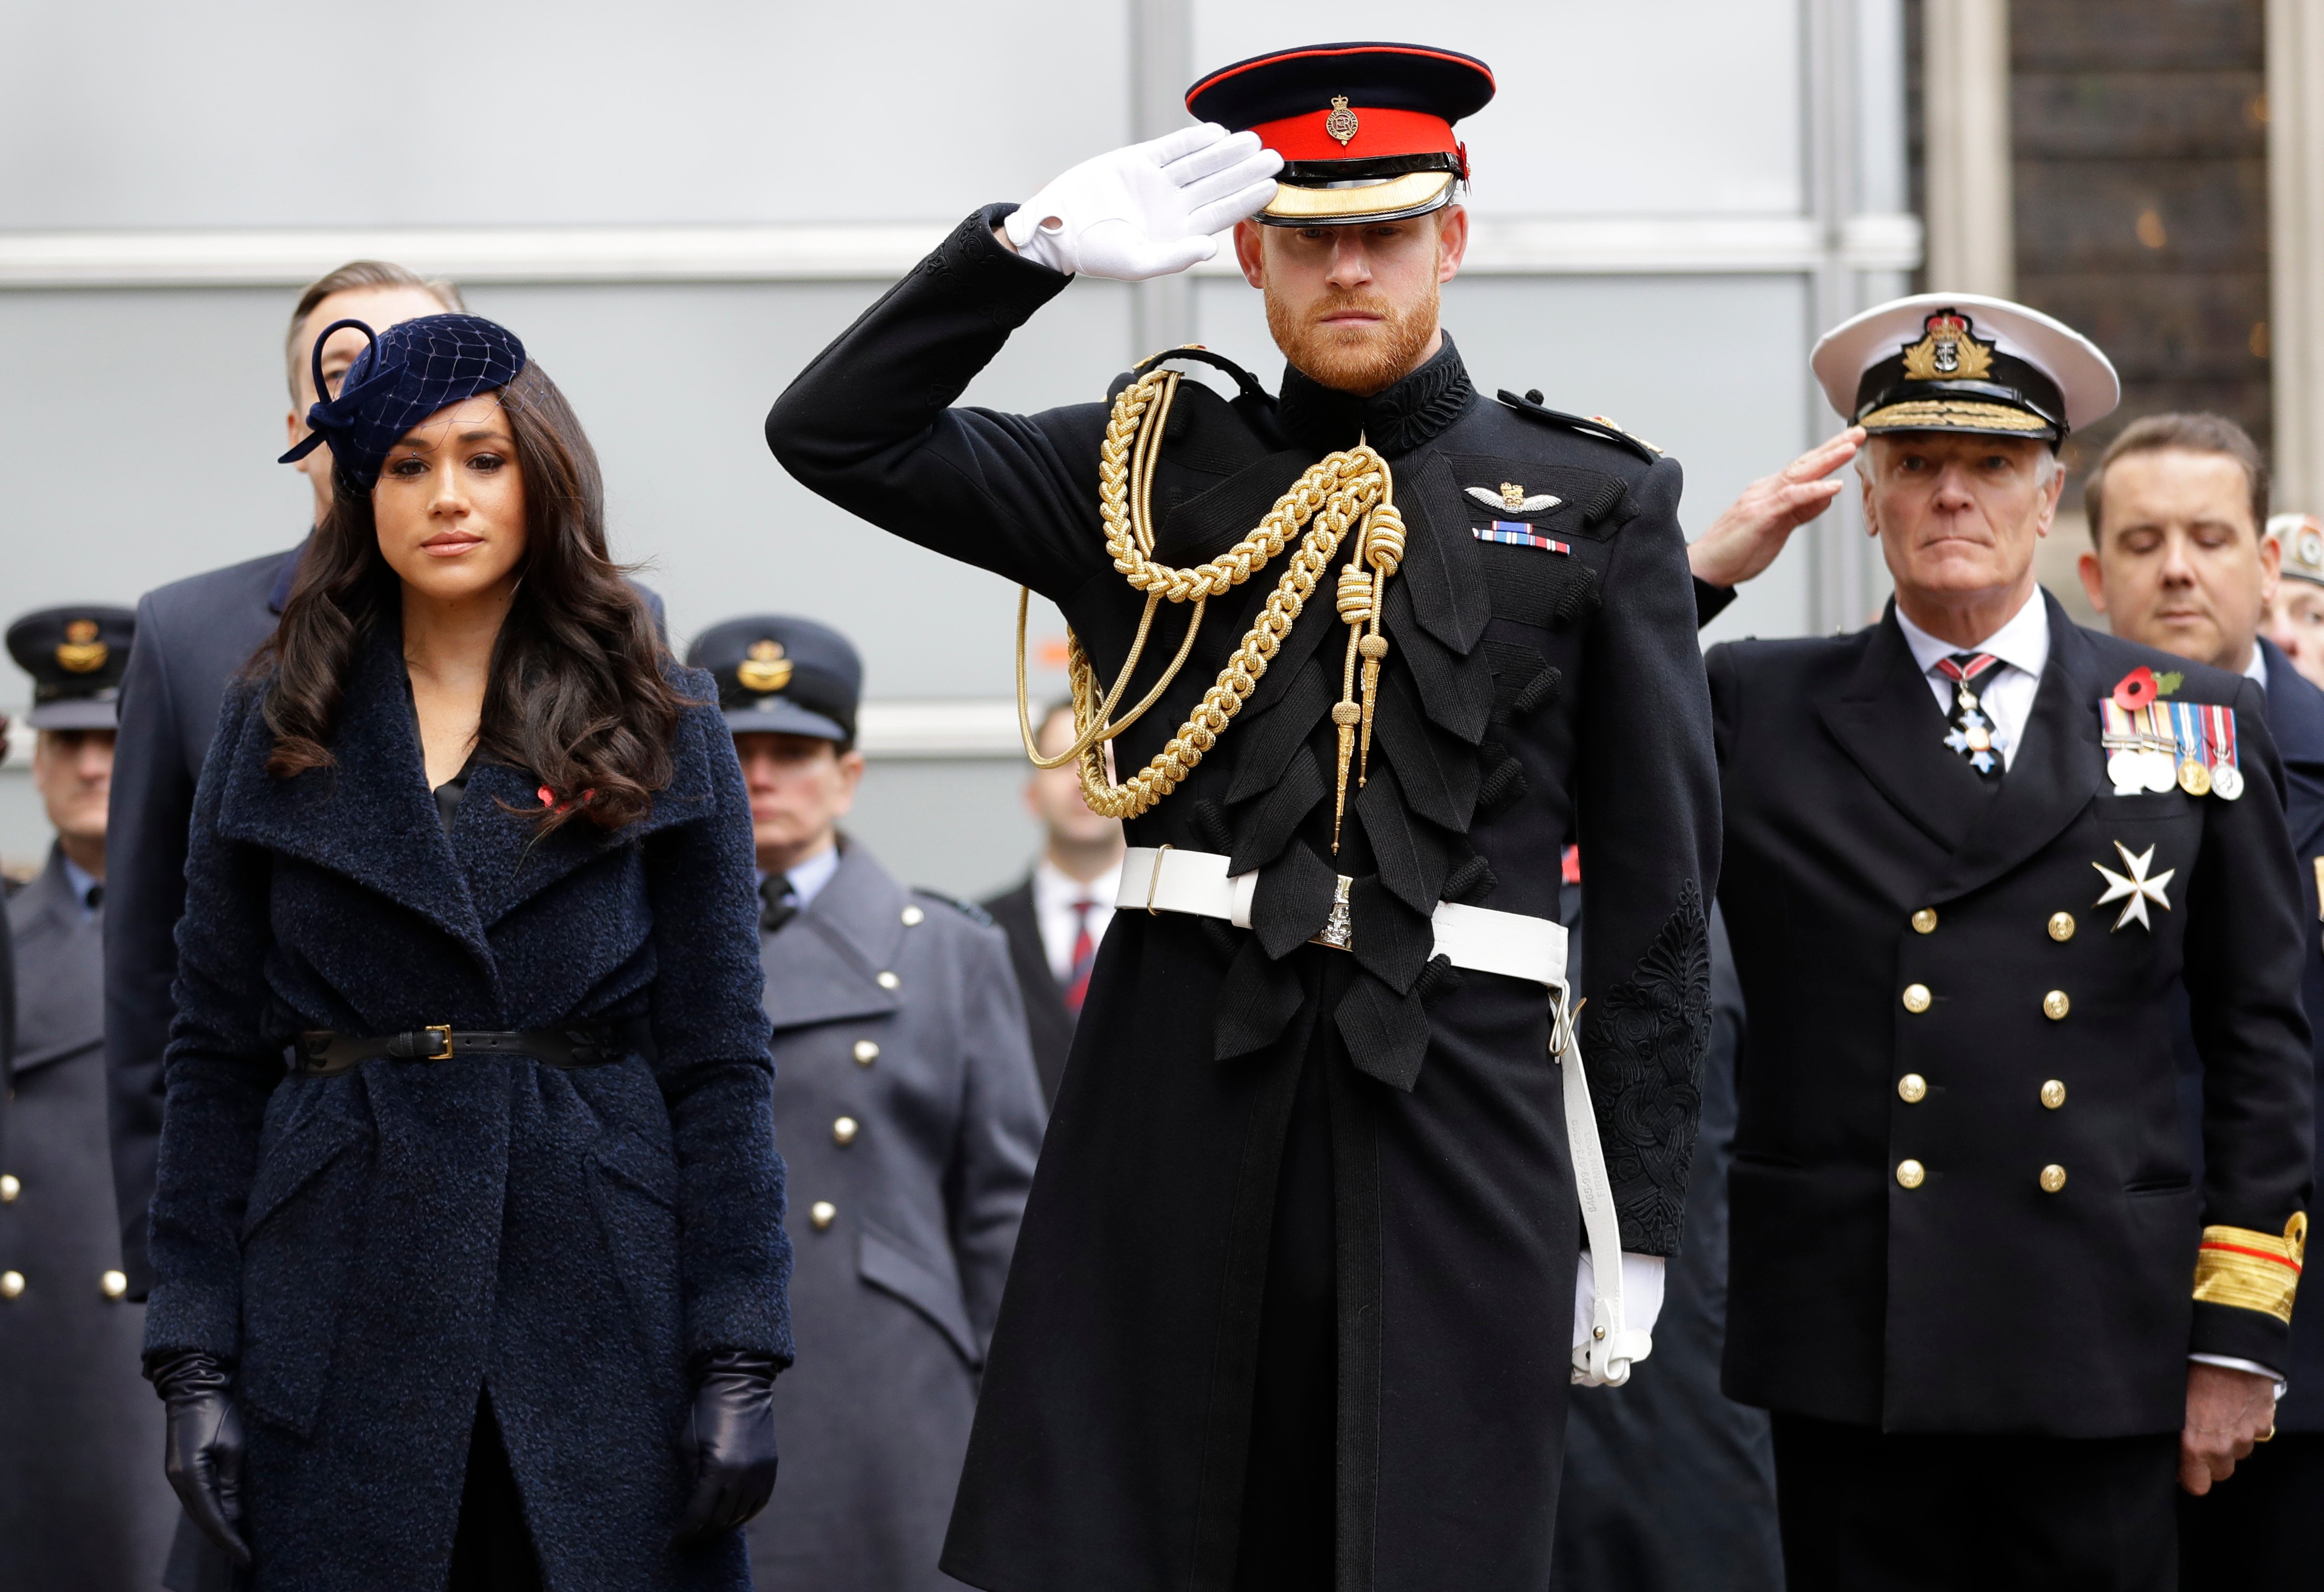 Britain's Prince Harry, Duke of Sussex and his wife Meghan, Duchess of Sussex pay their respects after laying a Cross of Remembrance in front of wooden crosses from the Graves of Unknown British Soldiers from the First and Second World Wars, during their visit to the Field of Remembrance at Westminster Abbey in central London on November 7, 2019. - The Field of Remembrance is organised by The Poppy Factory, and has been held in the grounds of Westminster Abbey since November 1928, when only two Remembrance Tribute Crosses were planted. In the run-up to Armistice Day, many Britons wear a paper red poppy -- symbolising the poppies which grew on French and Belgian battlefields during World War I -- in their lapels. (Photo by KIRSTY WIGGLESWORTH/POOL/AFP via Getty Images)